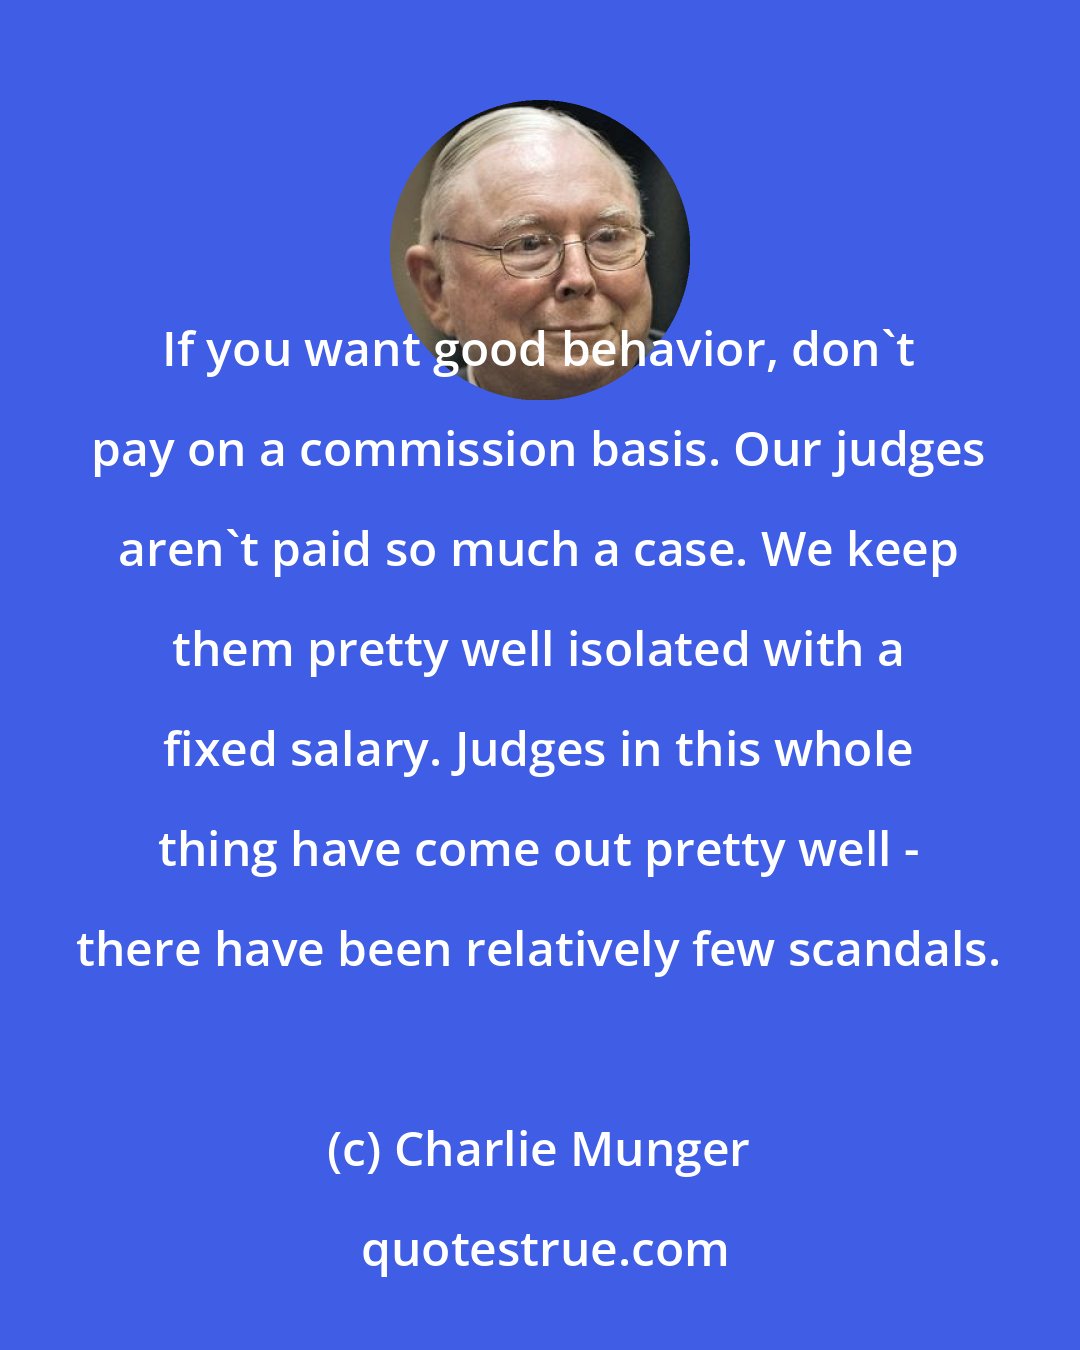 Charlie Munger: If you want good behavior, don't pay on a commission basis. Our judges aren't paid so much a case. We keep them pretty well isolated with a fixed salary. Judges in this whole thing have come out pretty well - there have been relatively few scandals.